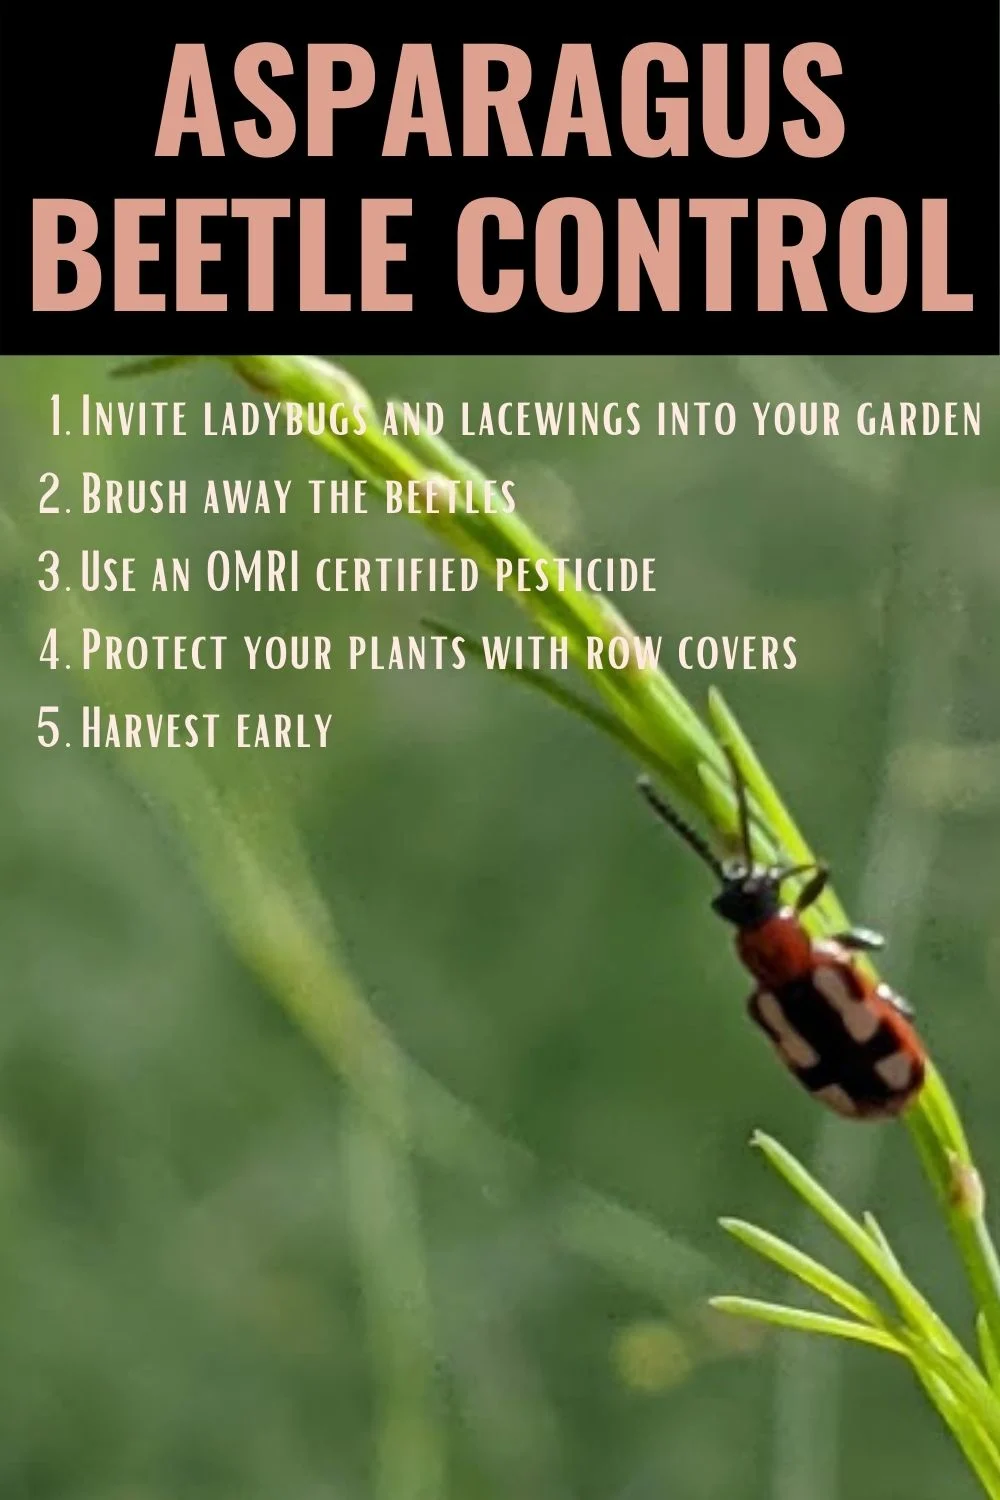 tips for asparagus beetle control